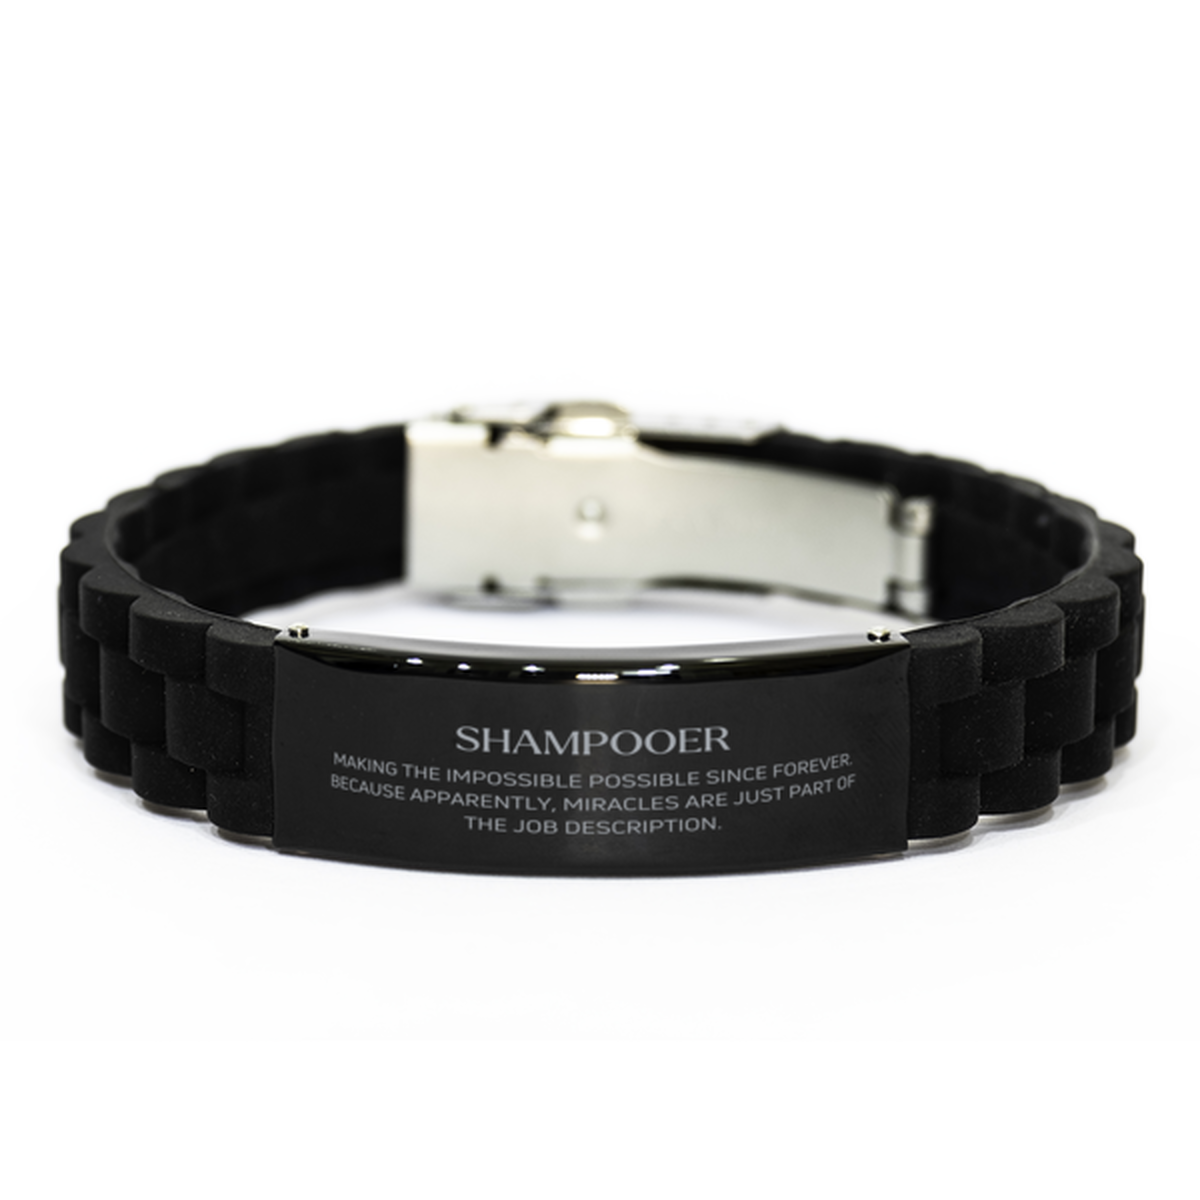 Funny Shampooer Gifts, Miracles are just part of the job description, Inspirational Birthday Black Glidelock Clasp Bracelet For Shampooer, Men, Women, Coworkers, Friends, Boss